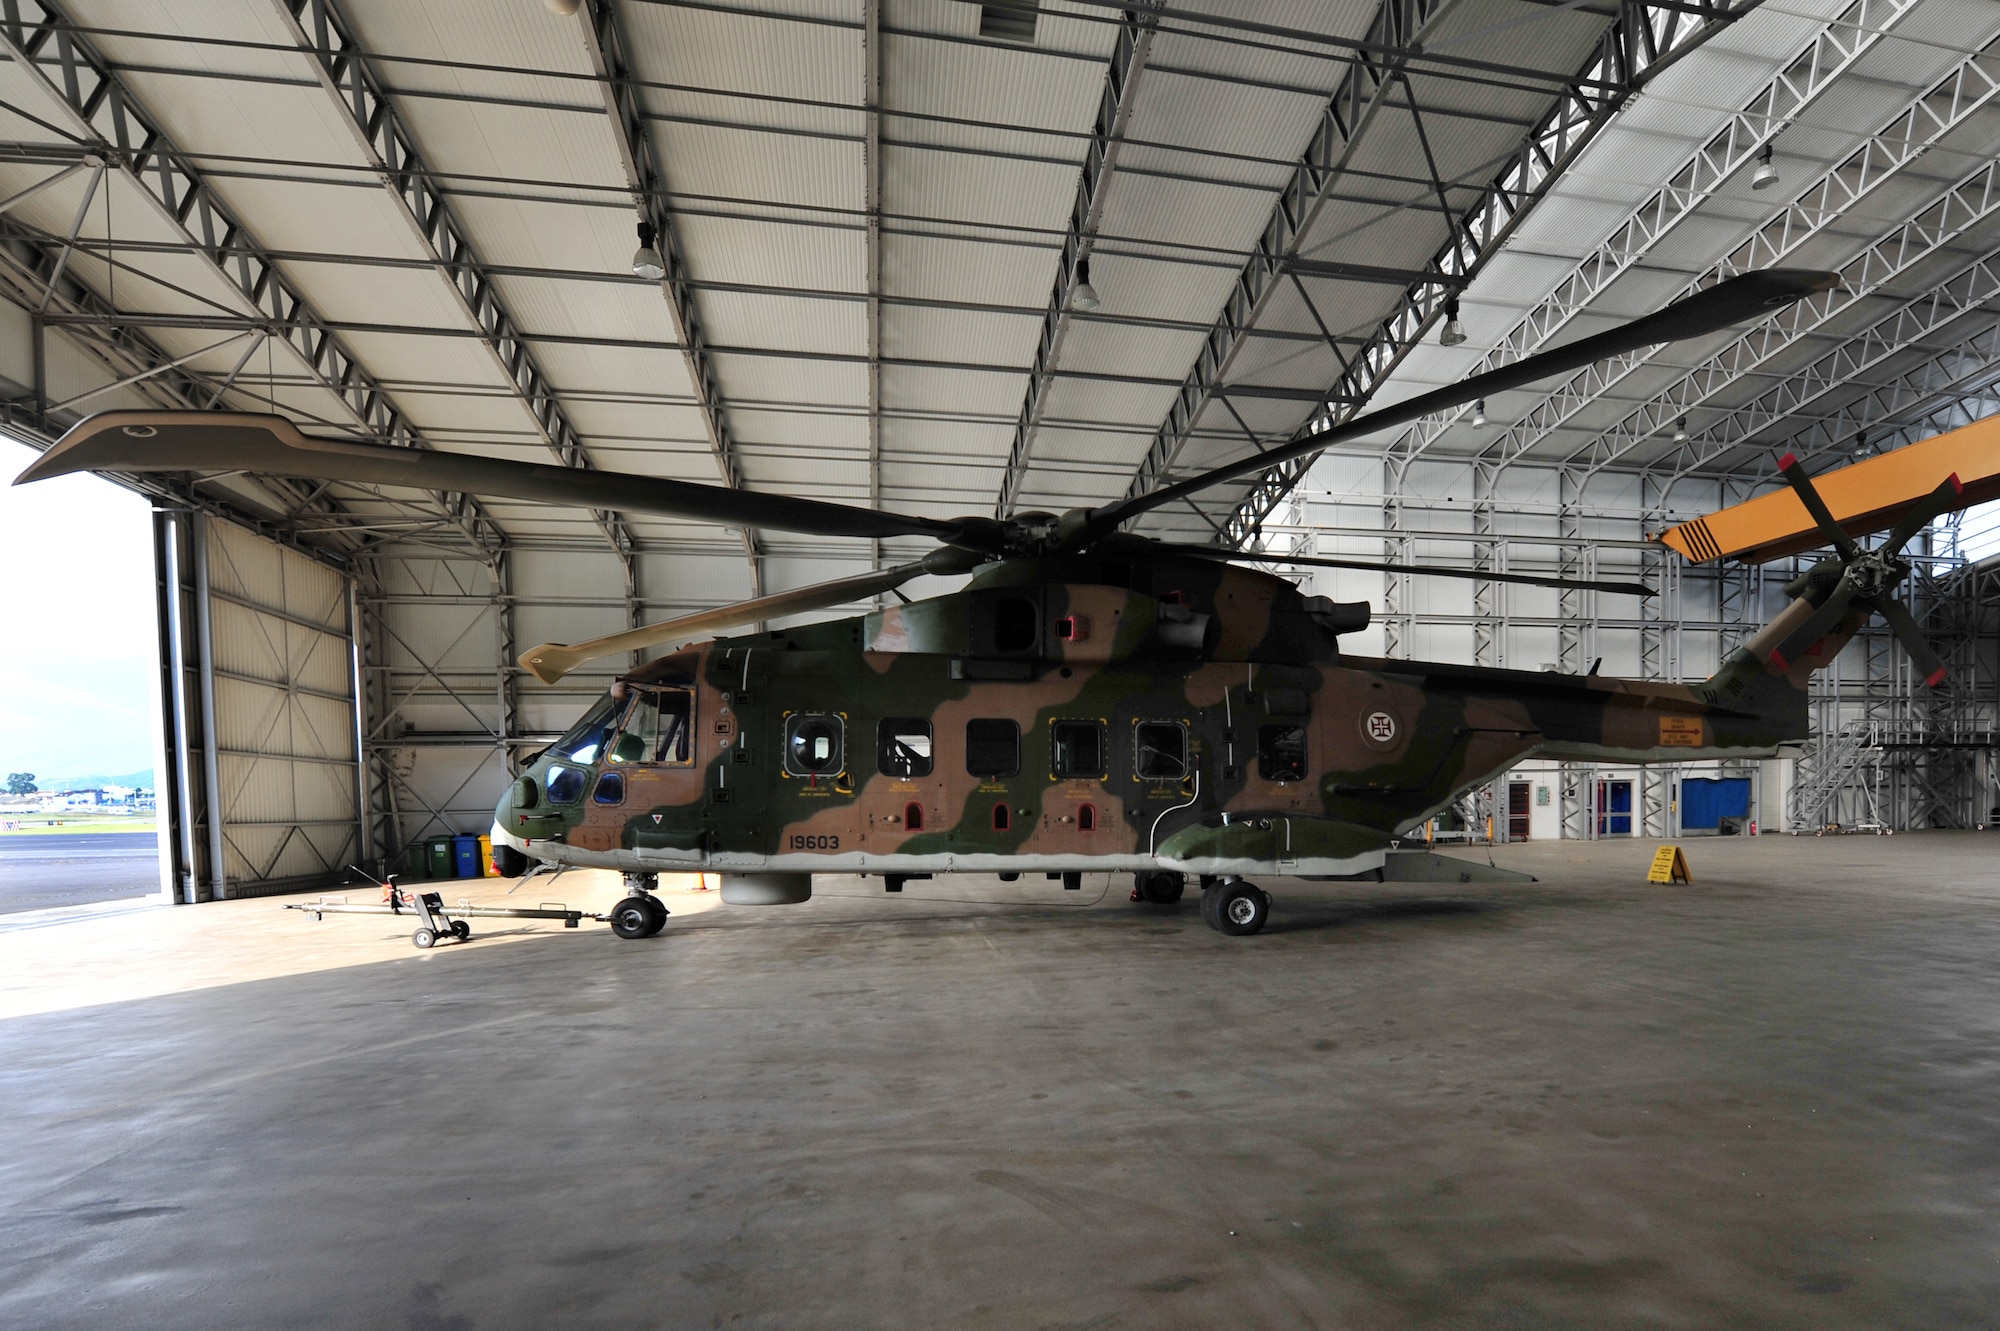 An EH-101 Merlin helicopter, ready for emergency and medical responses, in an aircraft hangar at Lajes Field, Azores.  The Portuguese Air Force utilizes this aircraft to conducts search and rescue missions as well as medical evacuations throughout the Azores islands.   Only two of the nine islands, Terceira and Sao Miguel, have major hospitals.   PoAF search and rescue missions transport people from other islands to the nearest hospital, often responding to women entering labor or people experiencing a health problem or a disabled vessel on the ocean.   (U.S. Air Force photo by Tech. Sgt. Chenzira Mallory/released)